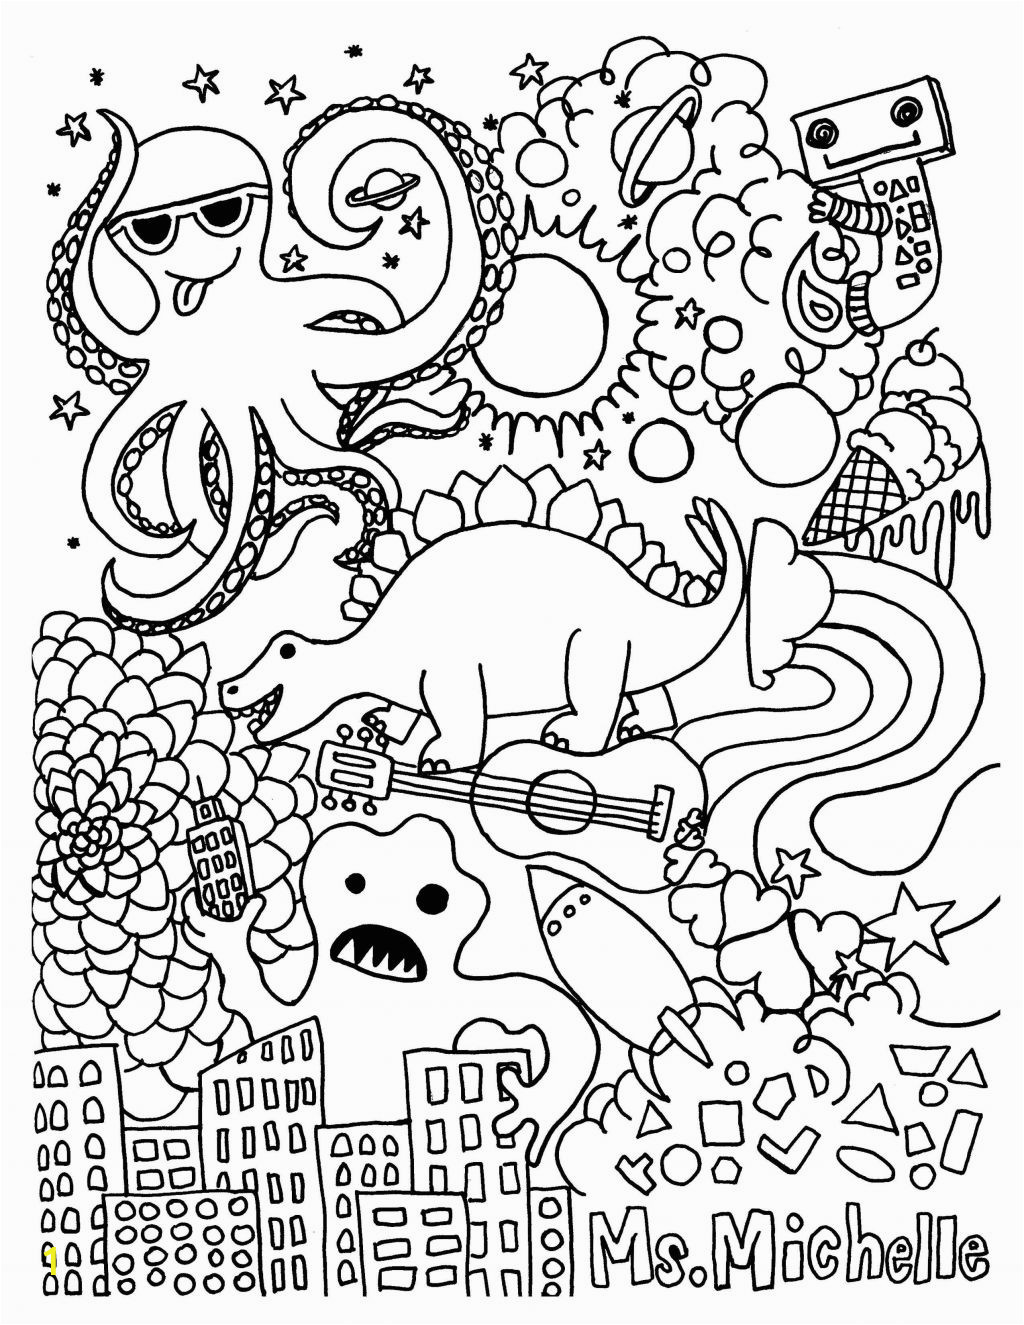 swear word coloring pages free art swear word coloring pages printable free posted by michelle of swear word coloring pages free 1024x1325